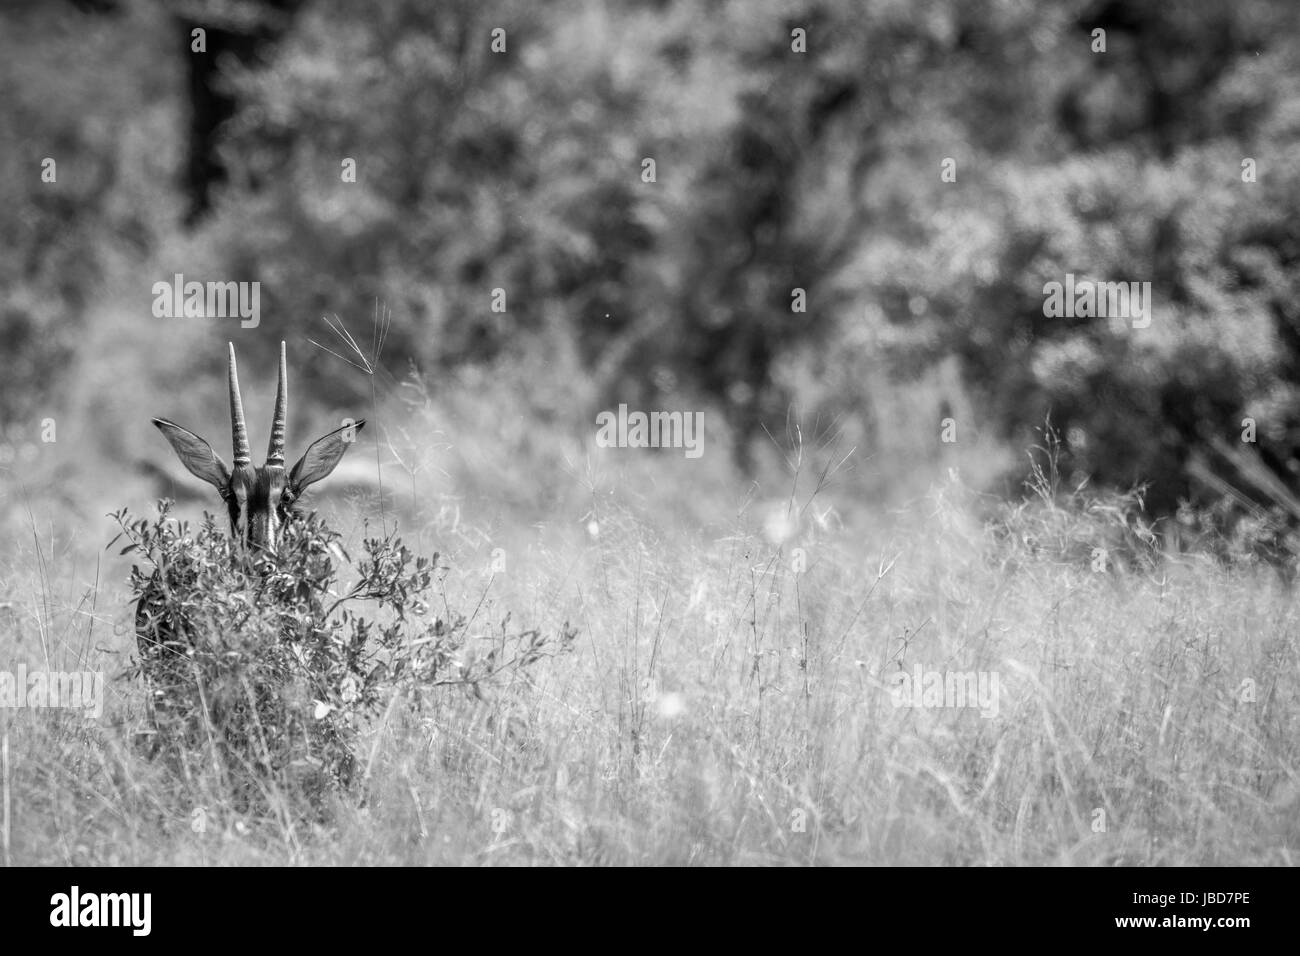 Young Sable antelope hiding behind a bush in black and white in the Hwange National Park, Zimbabwe. Stock Photo